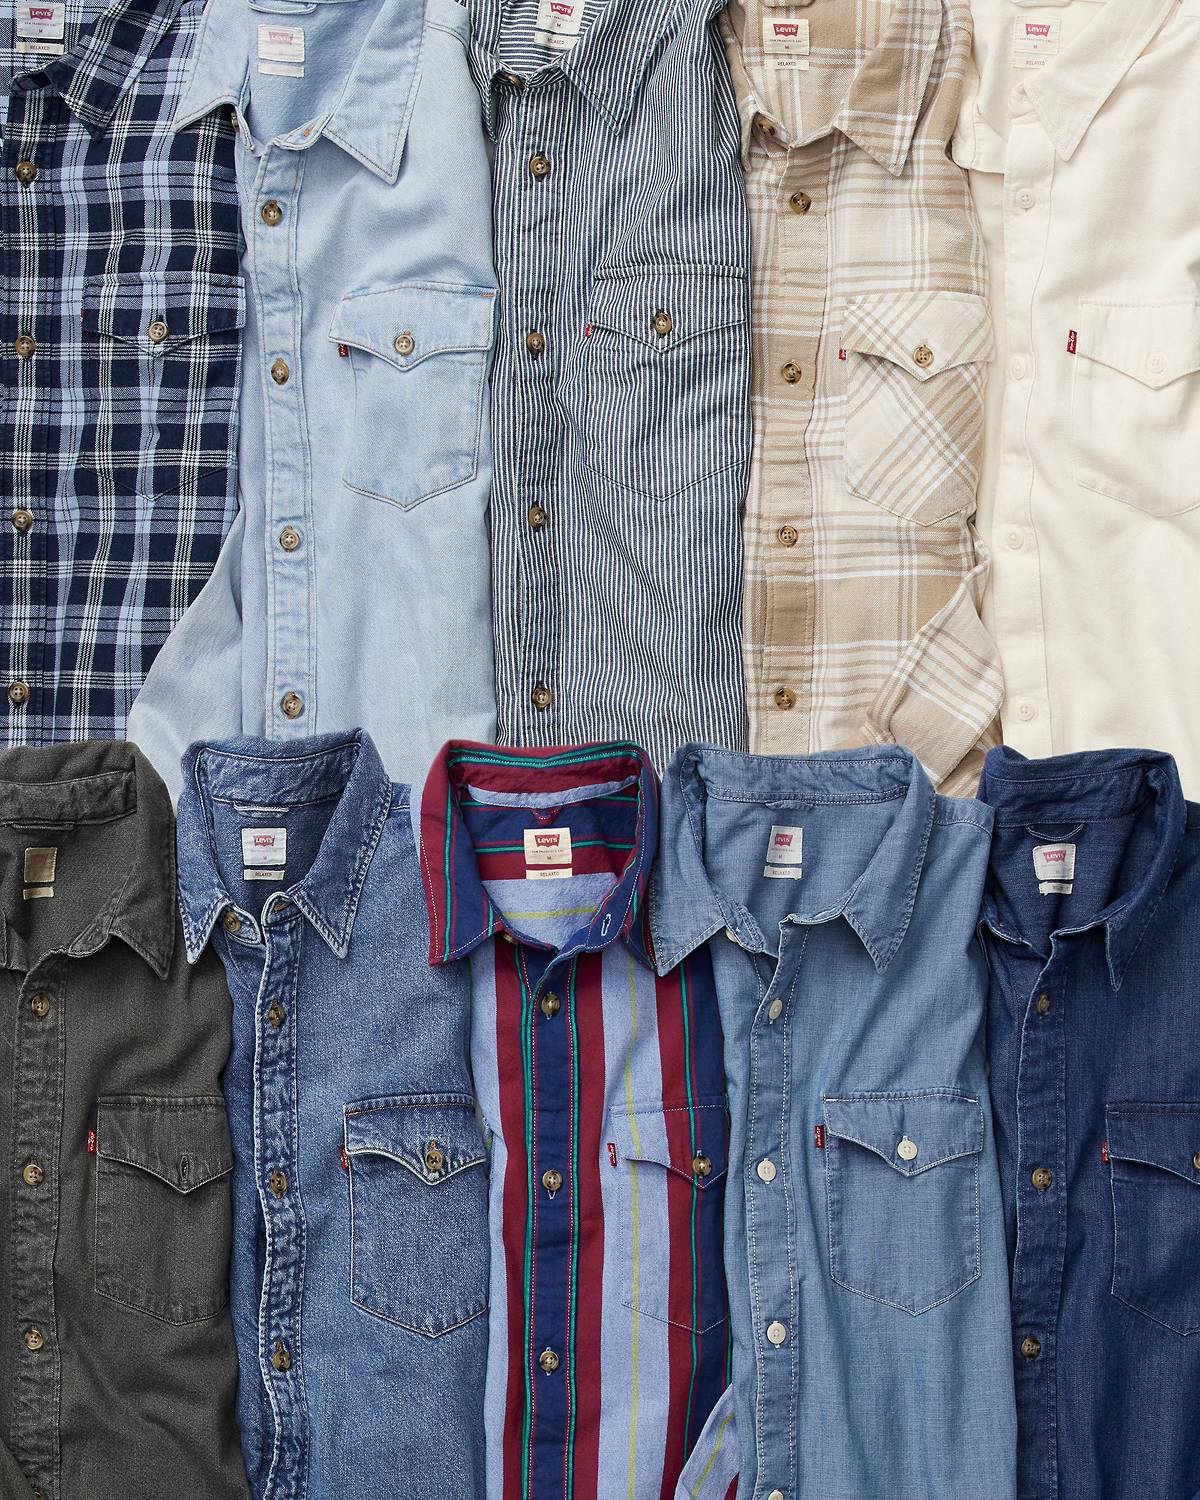 Flat lay image of assorted men's western woven button down shirts in numerous colors and patterns